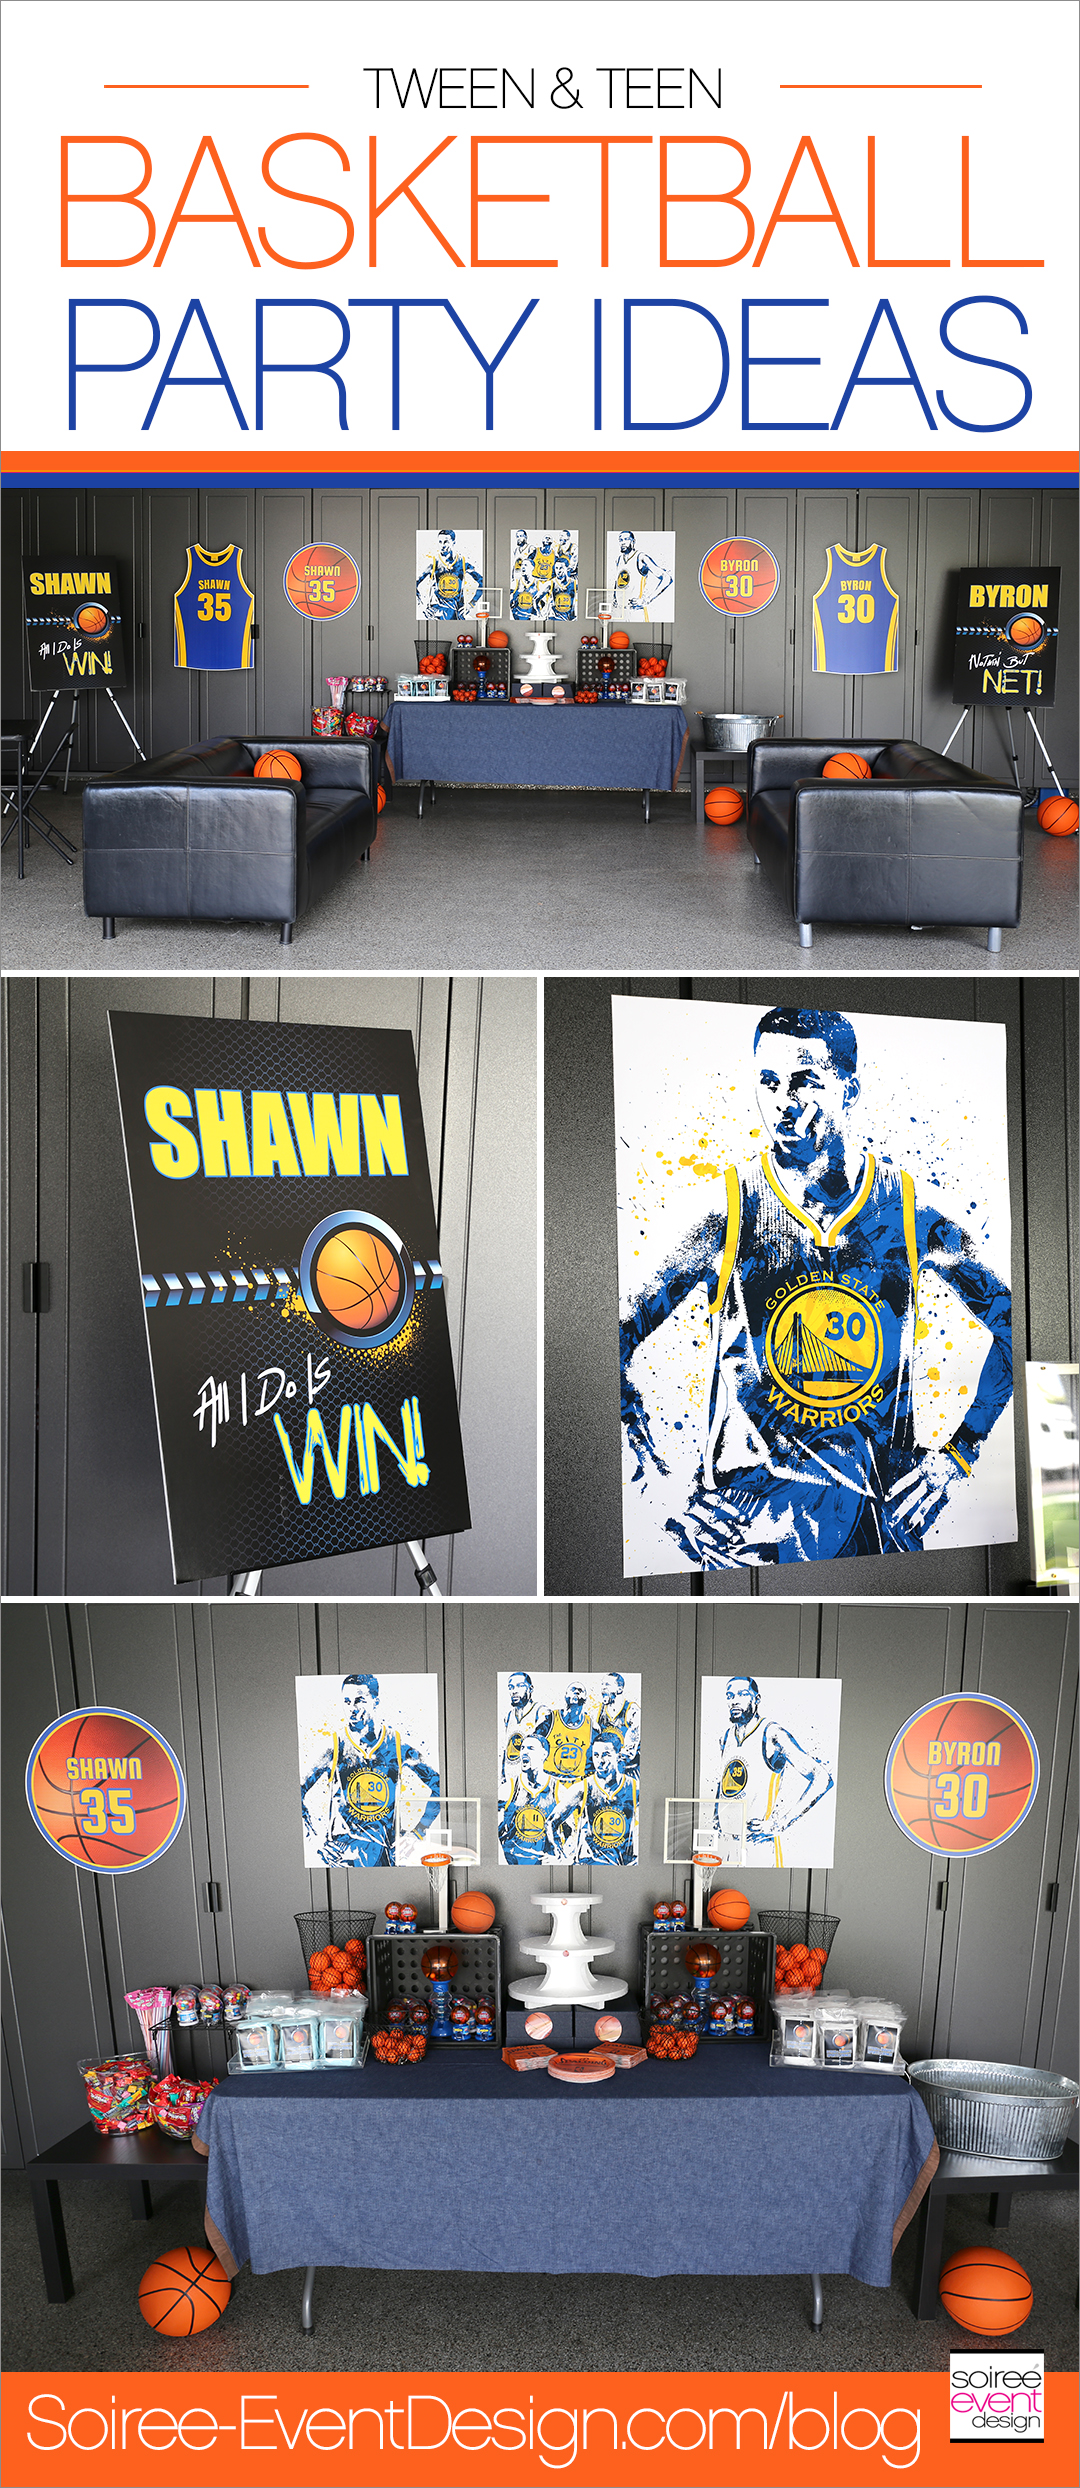 Basketball Party Ideas - Soiree Event Design